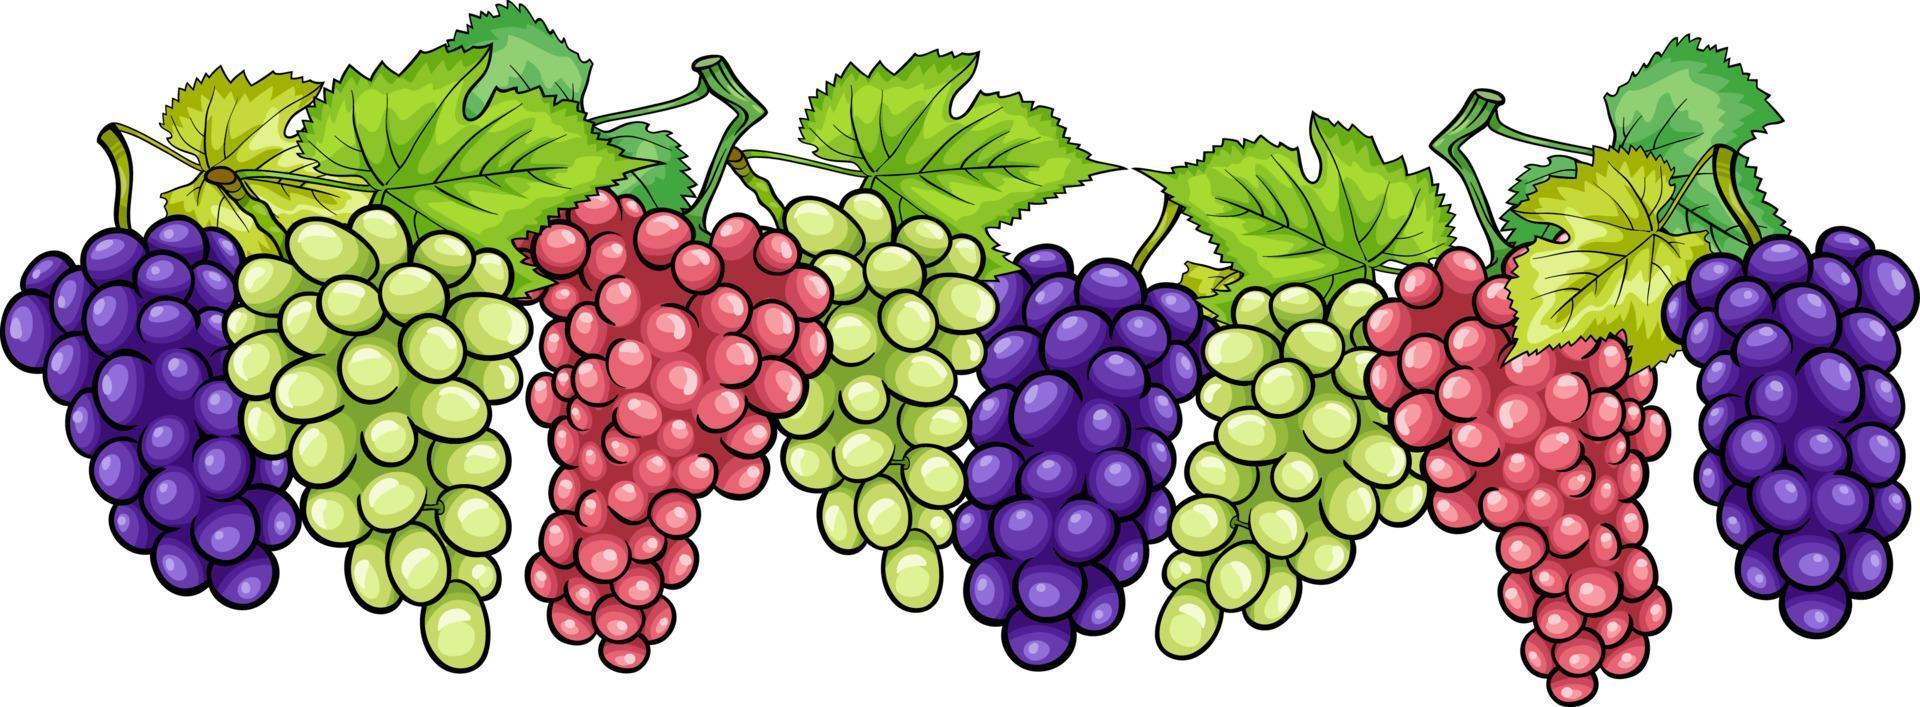 bunches of grapes fruit cartoon illustration vector